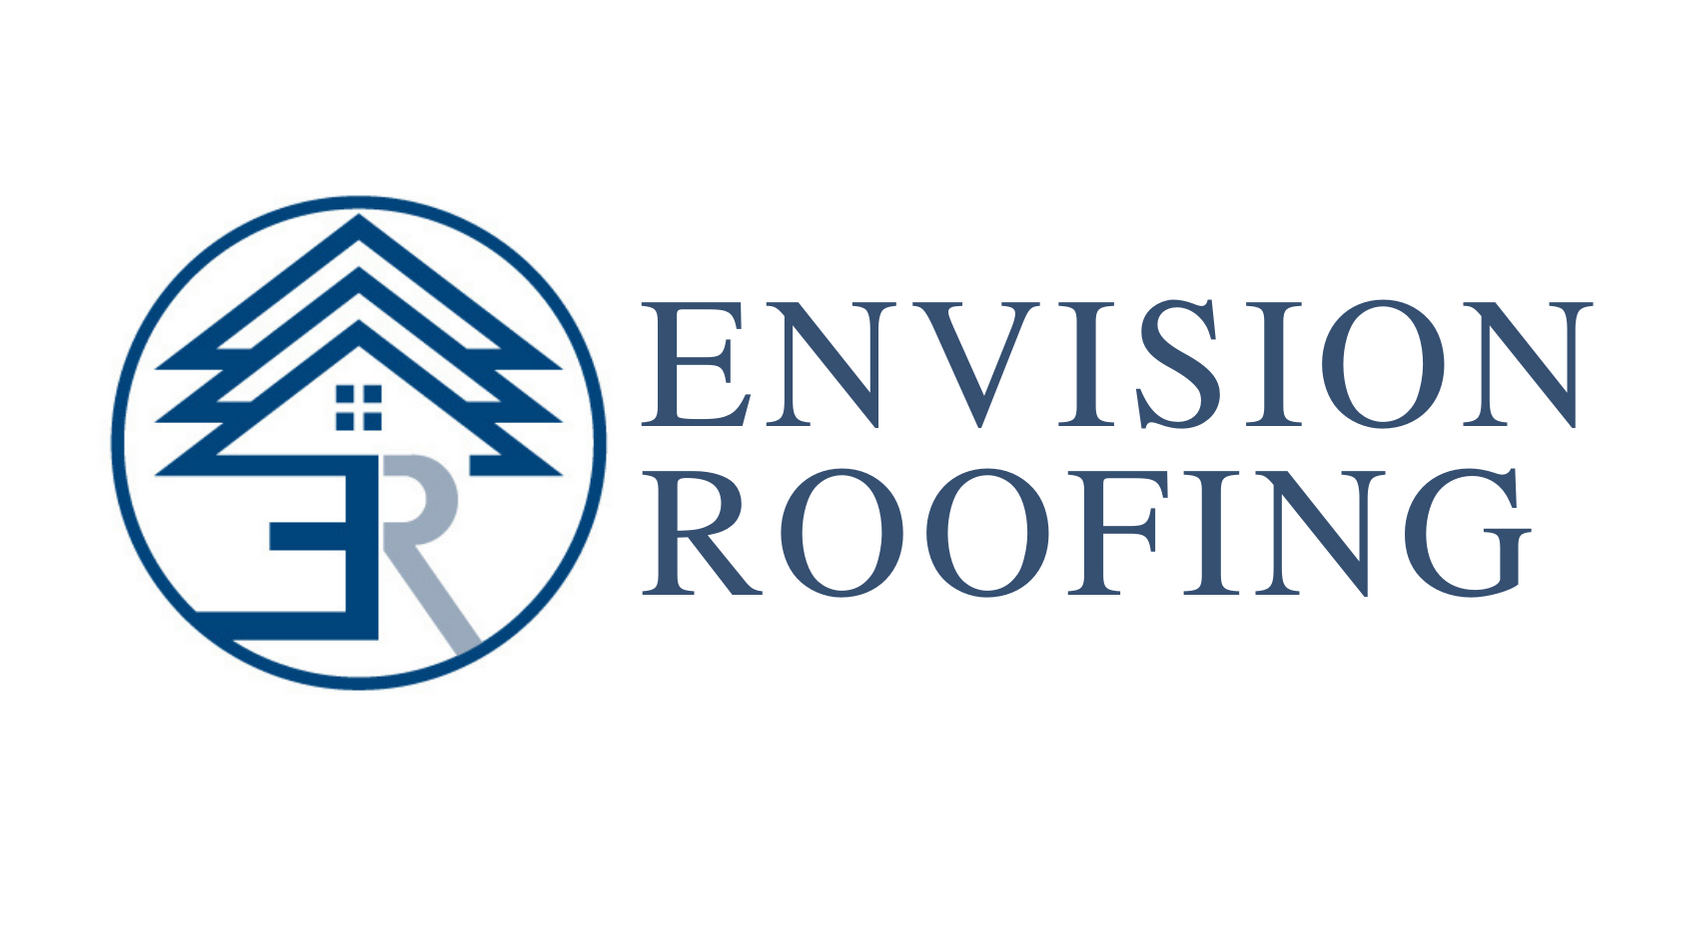 Envision Roofing & General Construction Logo